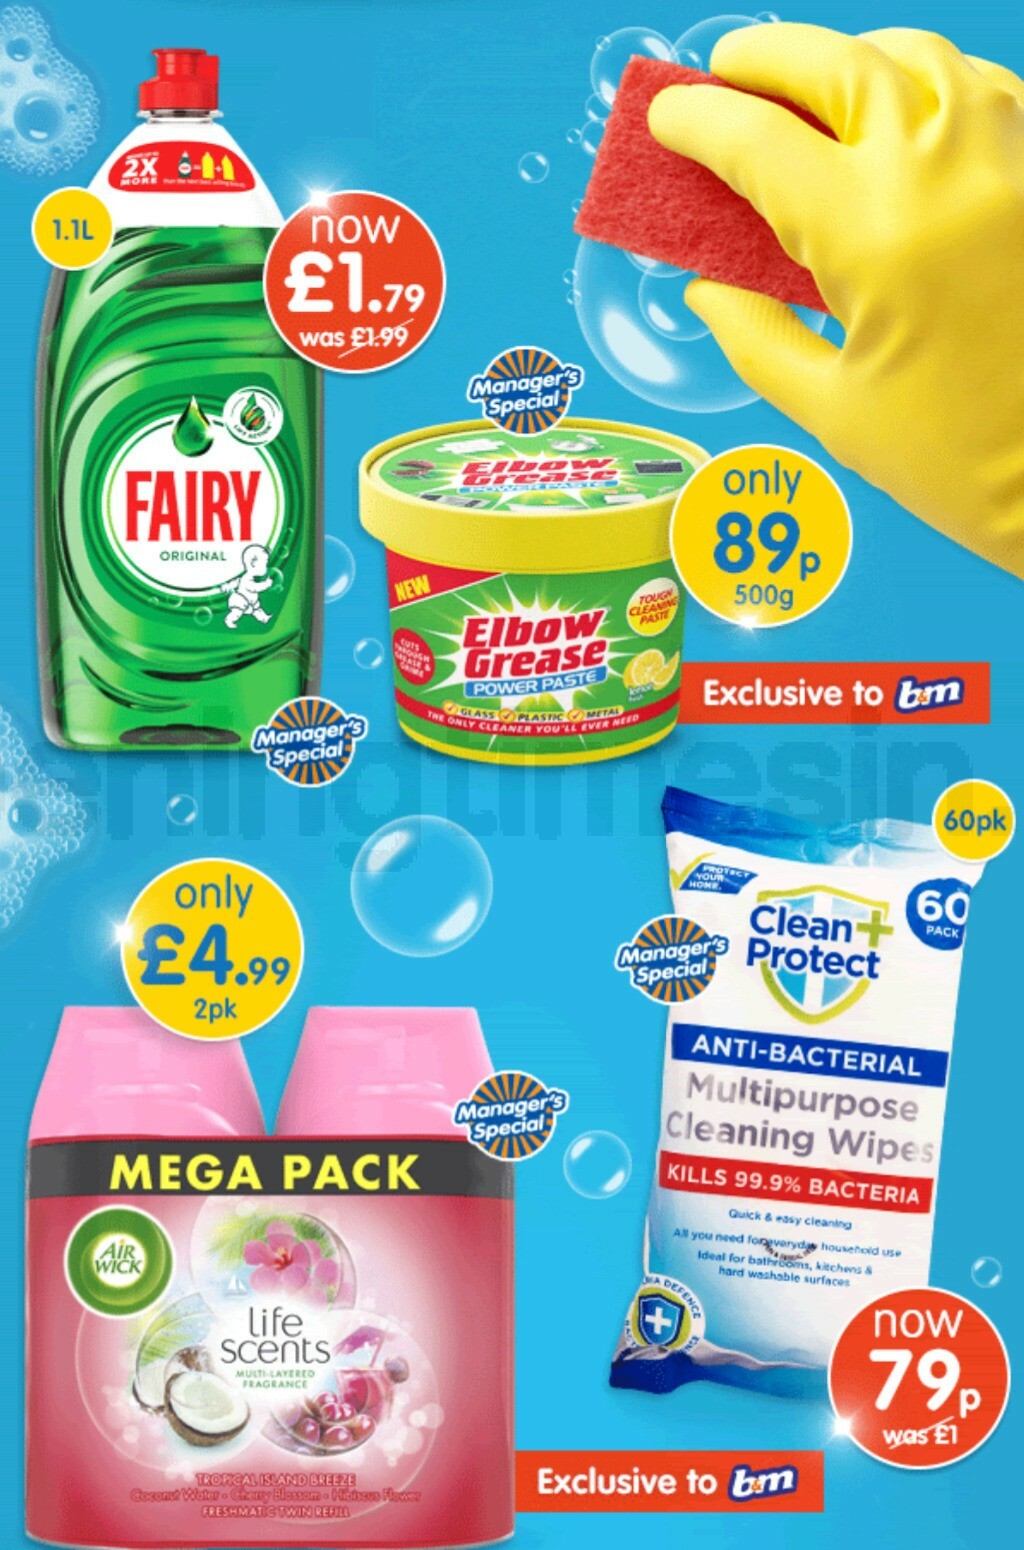 B&M Big Clean Offers from 11 September